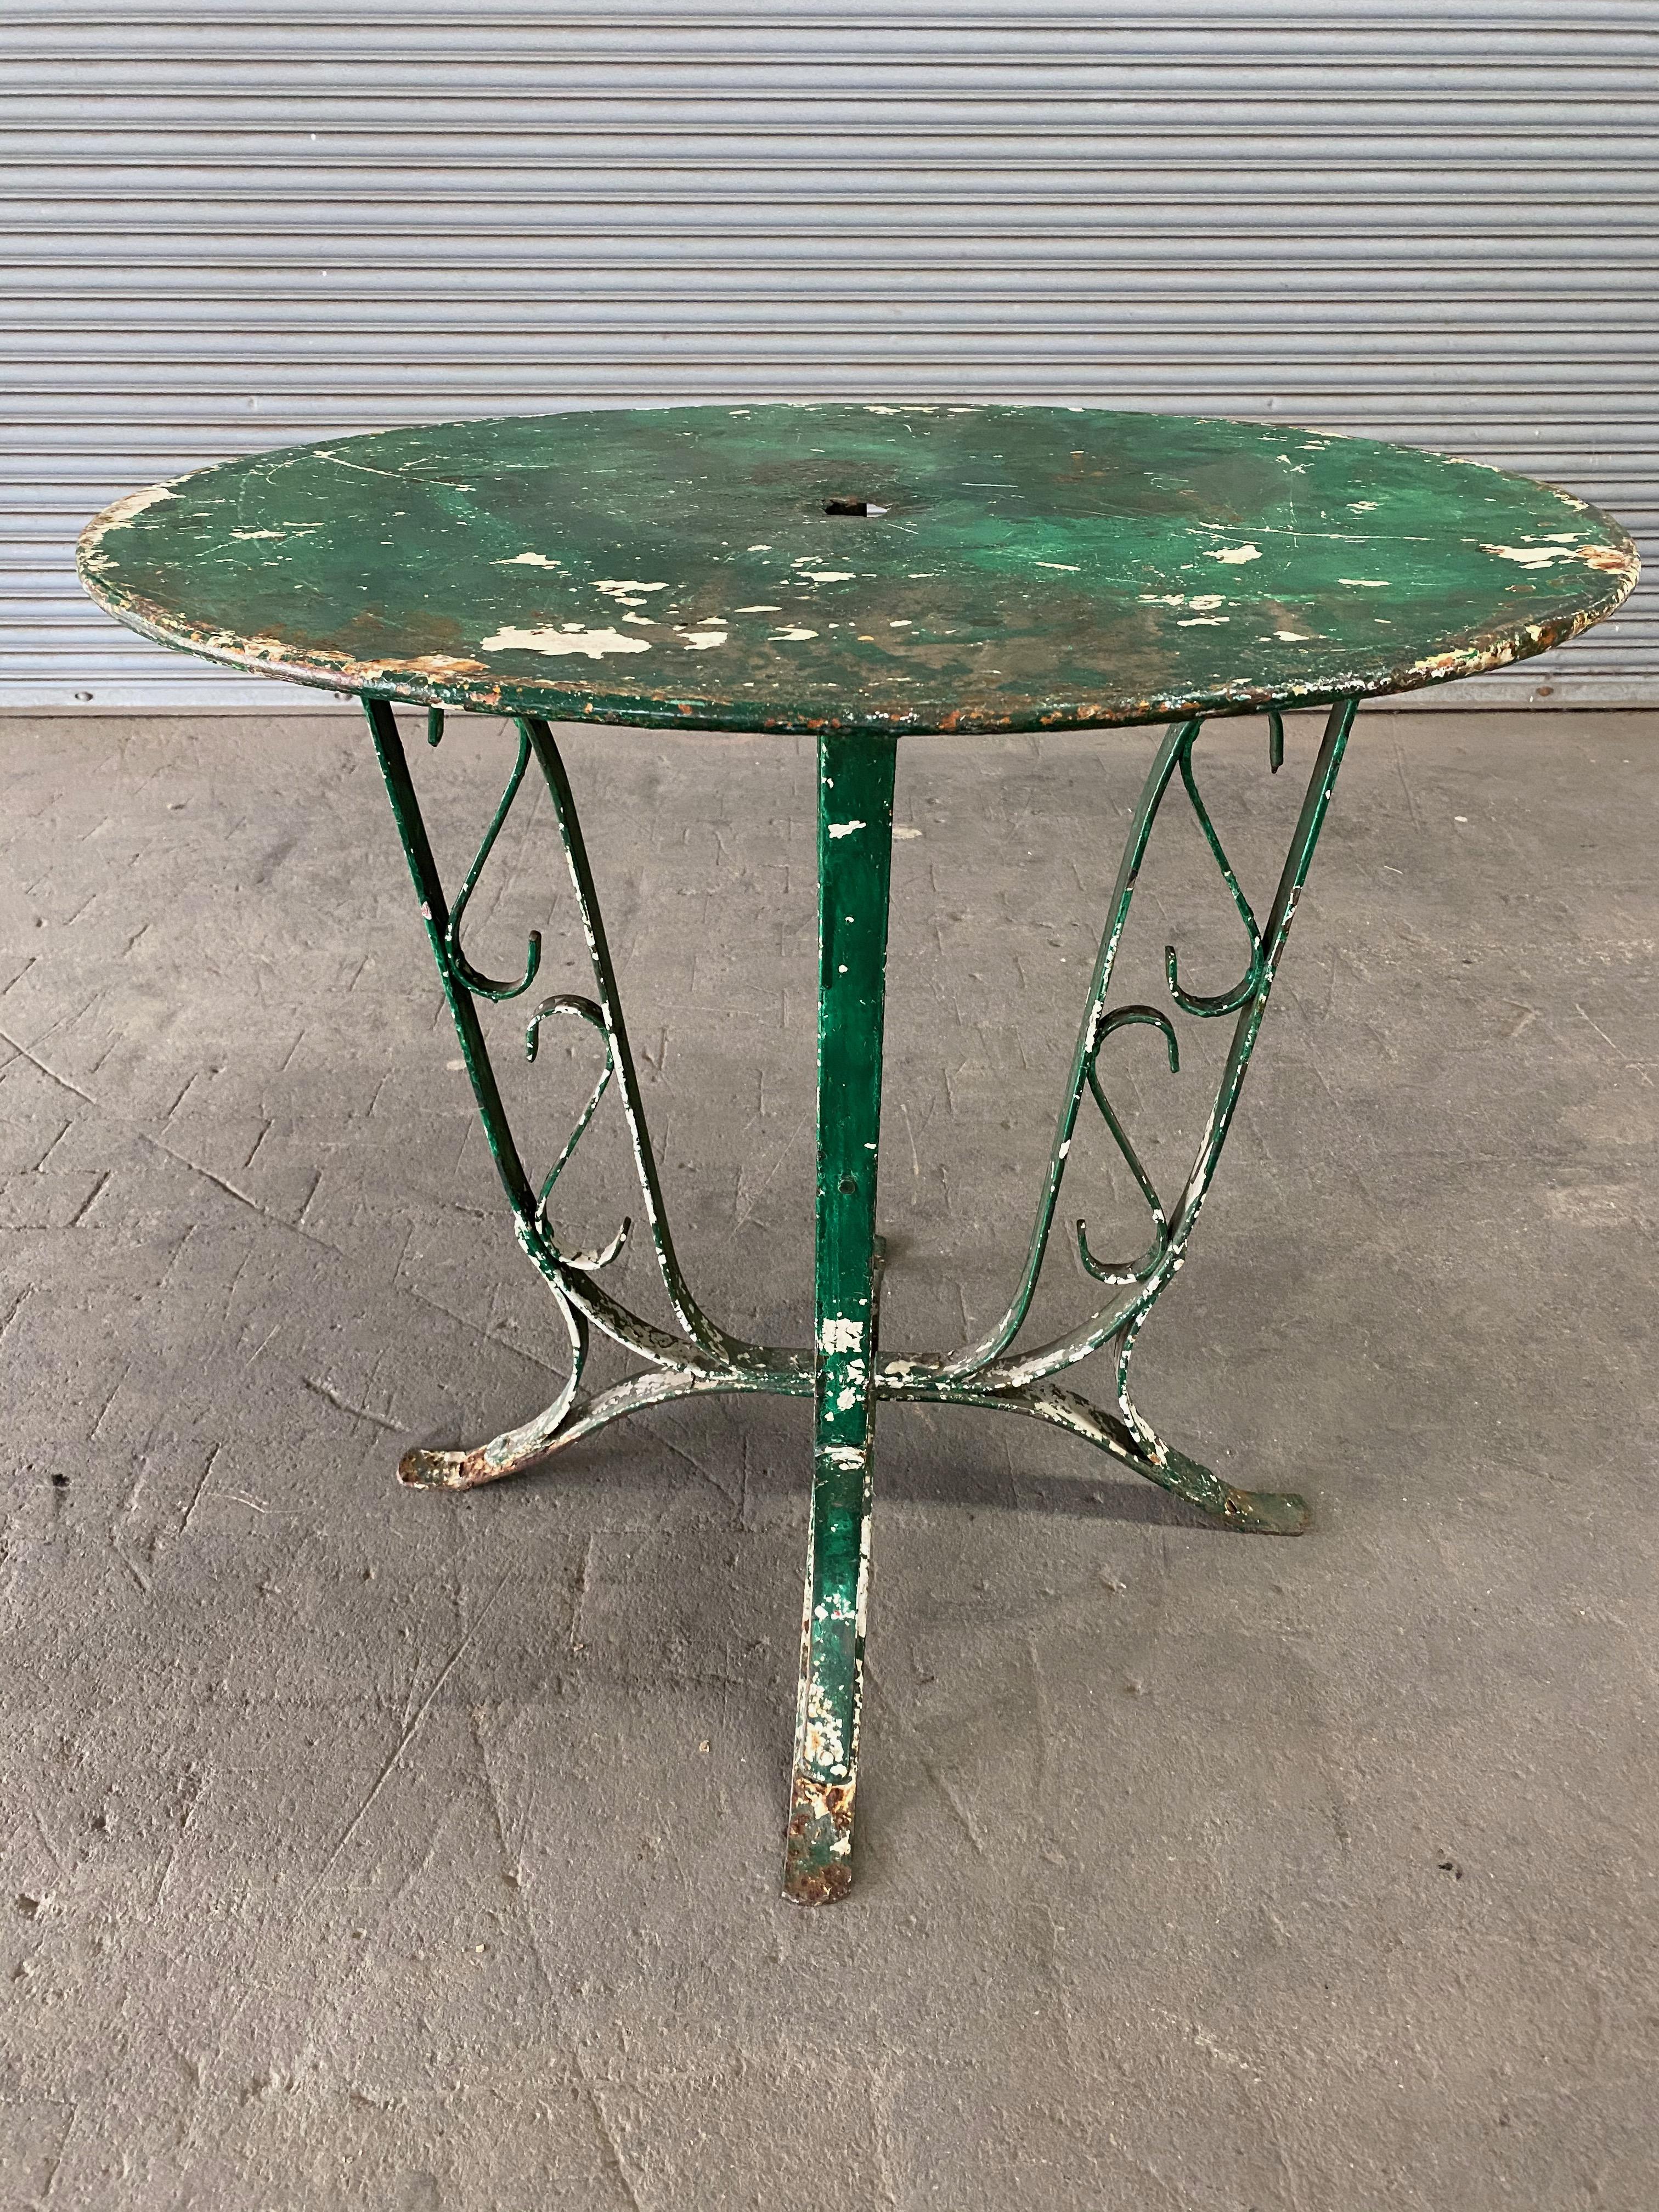 Here is a classic French garden table made in the 1920's. This table has been painted many times to preserve the iron and metal. The beautiful green patina probably dates back to the 1950's era. The metal top has an opening to hold an umbrella